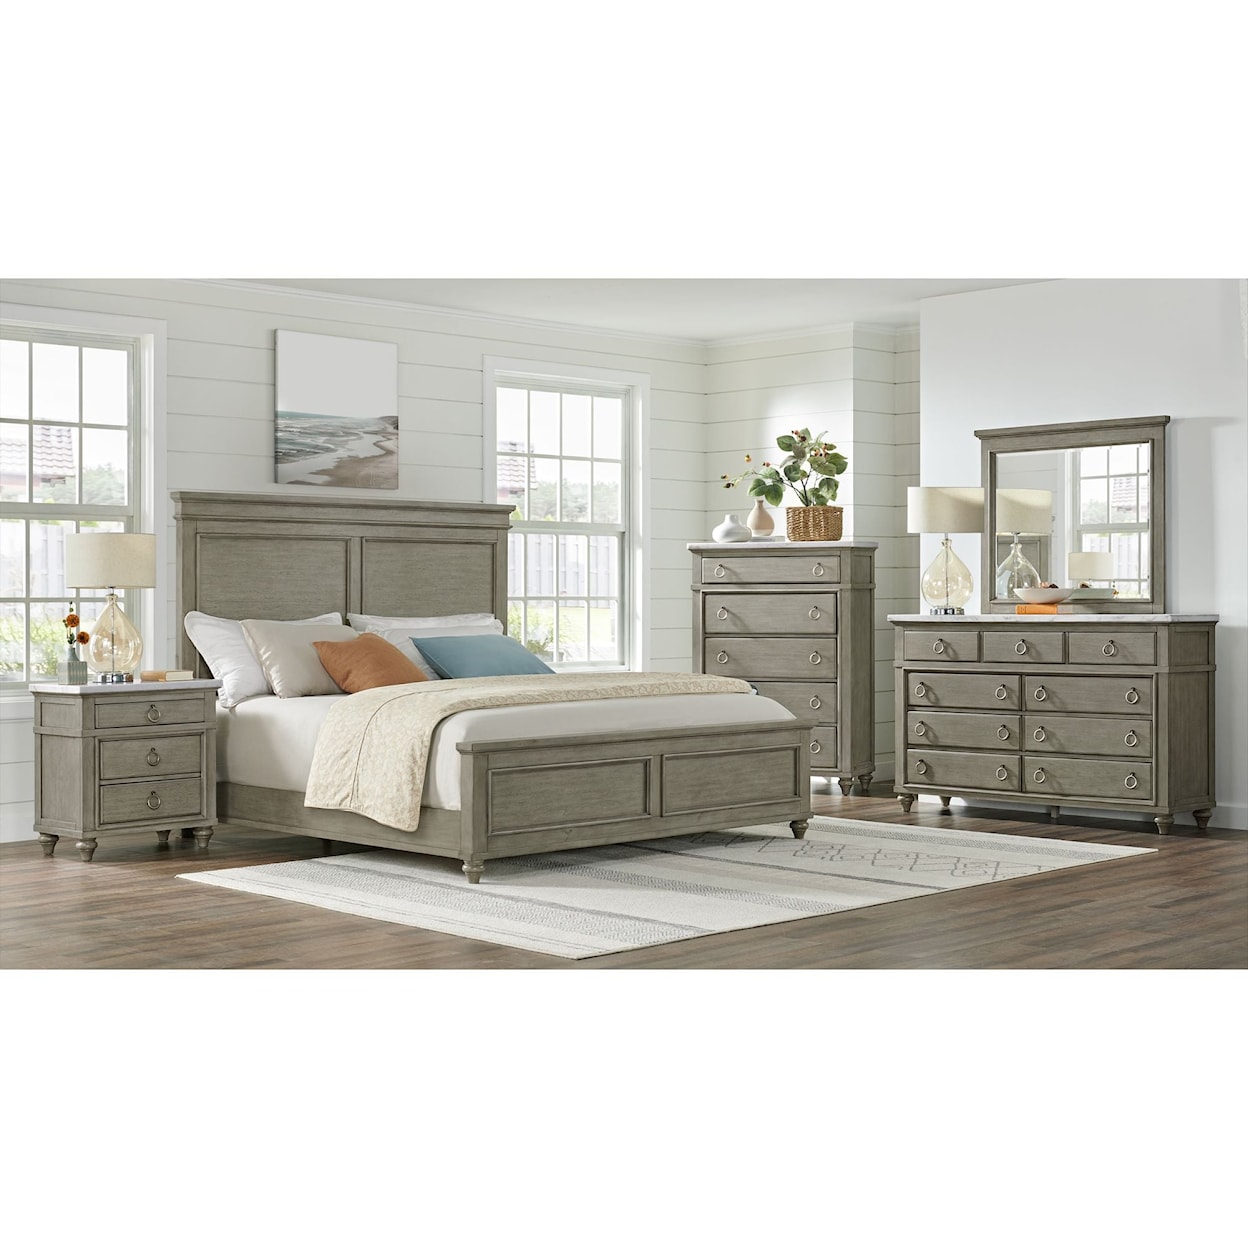 Elements International Kendari 5-Drawer Bedroom Chest with White Marble Top